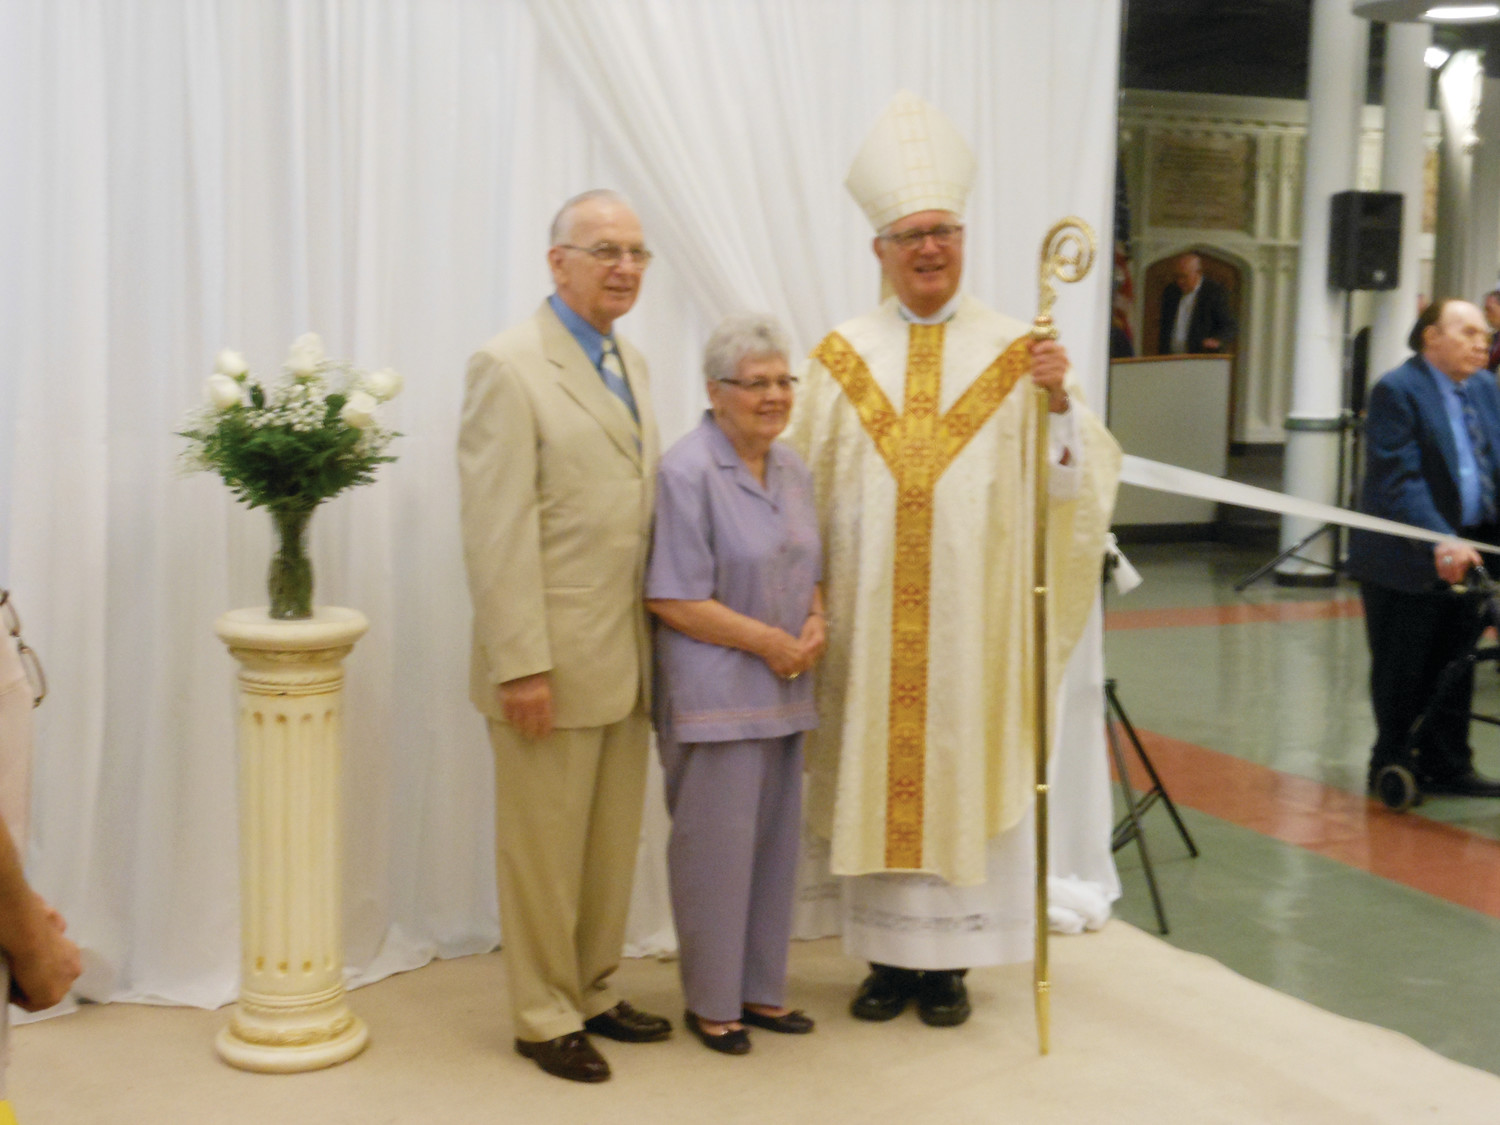 Normand and Lorraine Dalpe of Saint Theresa Parish in Harrisville pose for a photo with Bishop Tobin. The couple celebrated their diamond anniversary of 60 years.